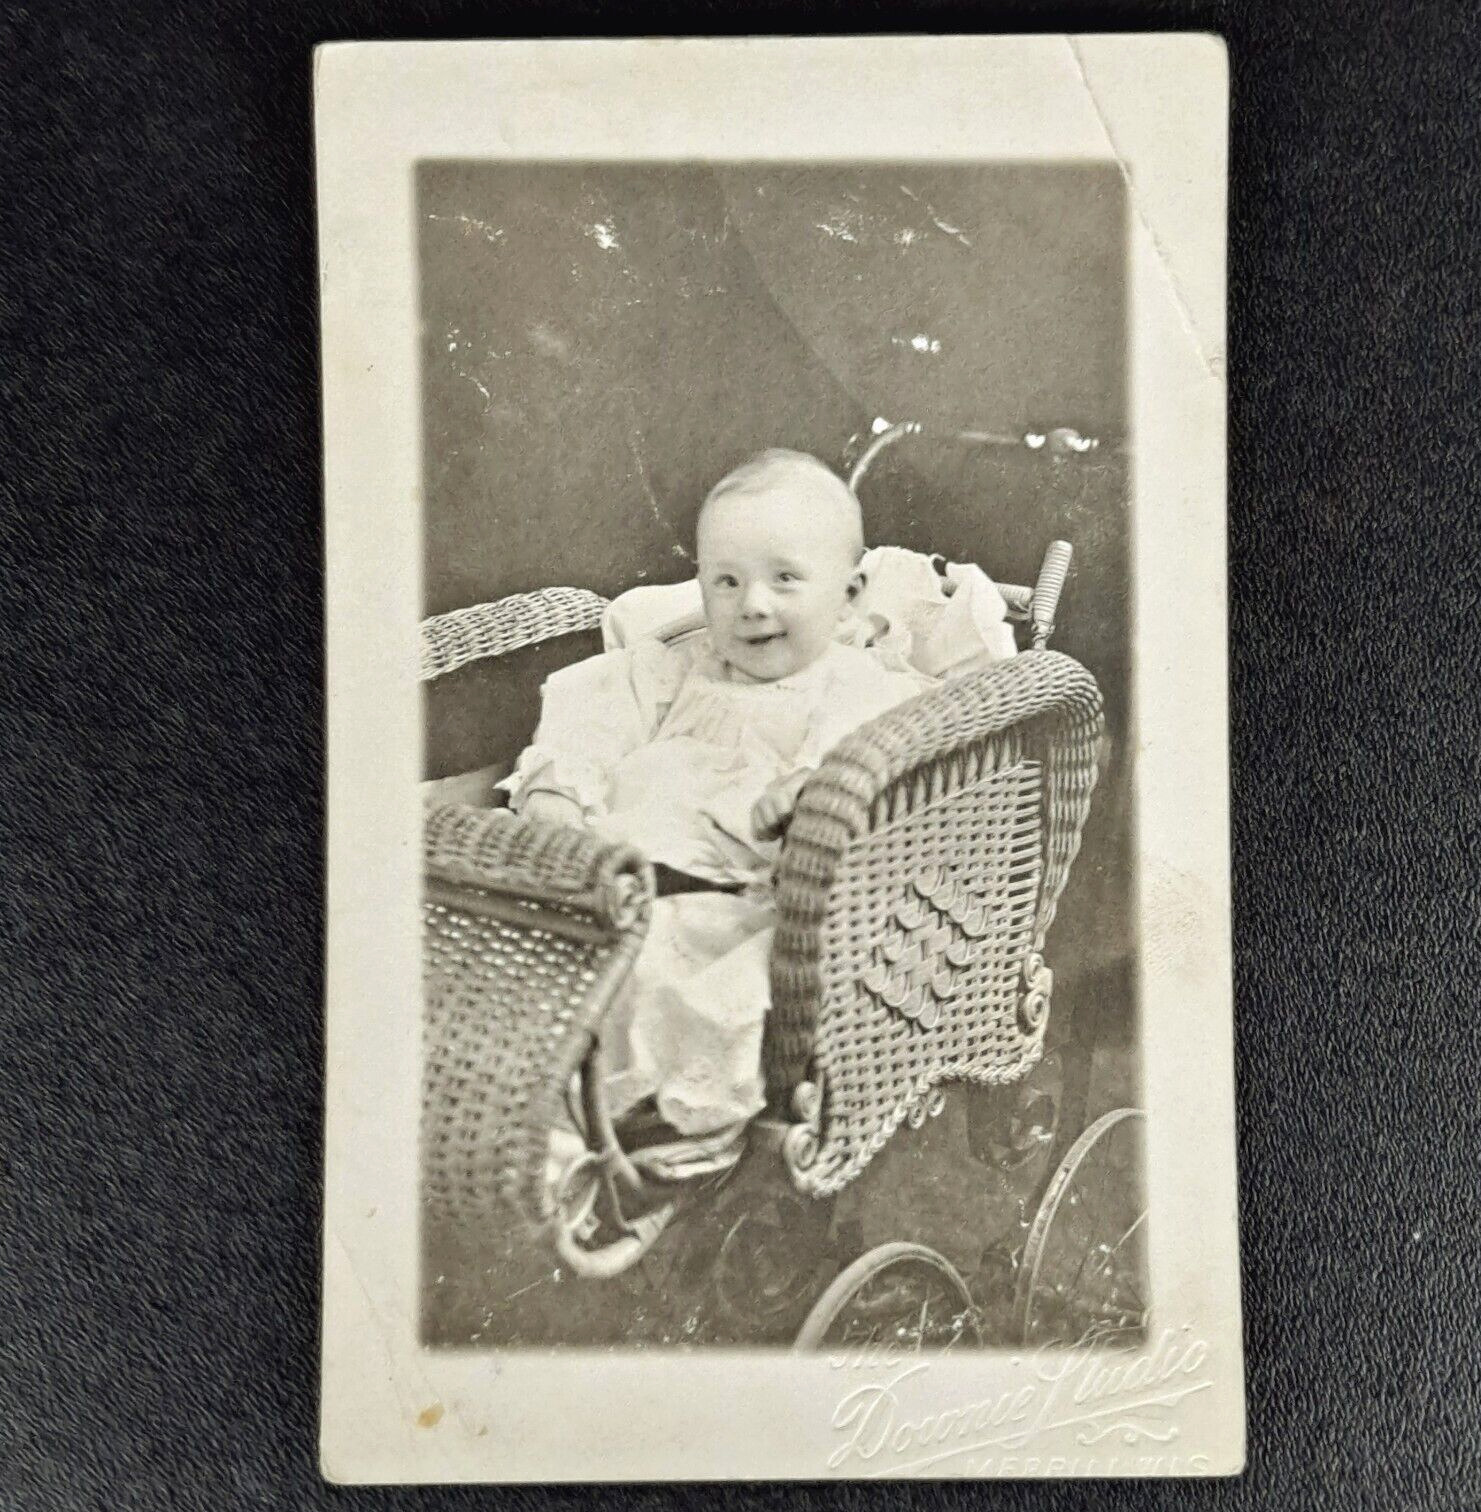 ANTIQUE PRE-WW1 POSTCARD BABY IN BUGGY DOWNIE STUDIO MERRILL WI RPPC - UNPOSTED